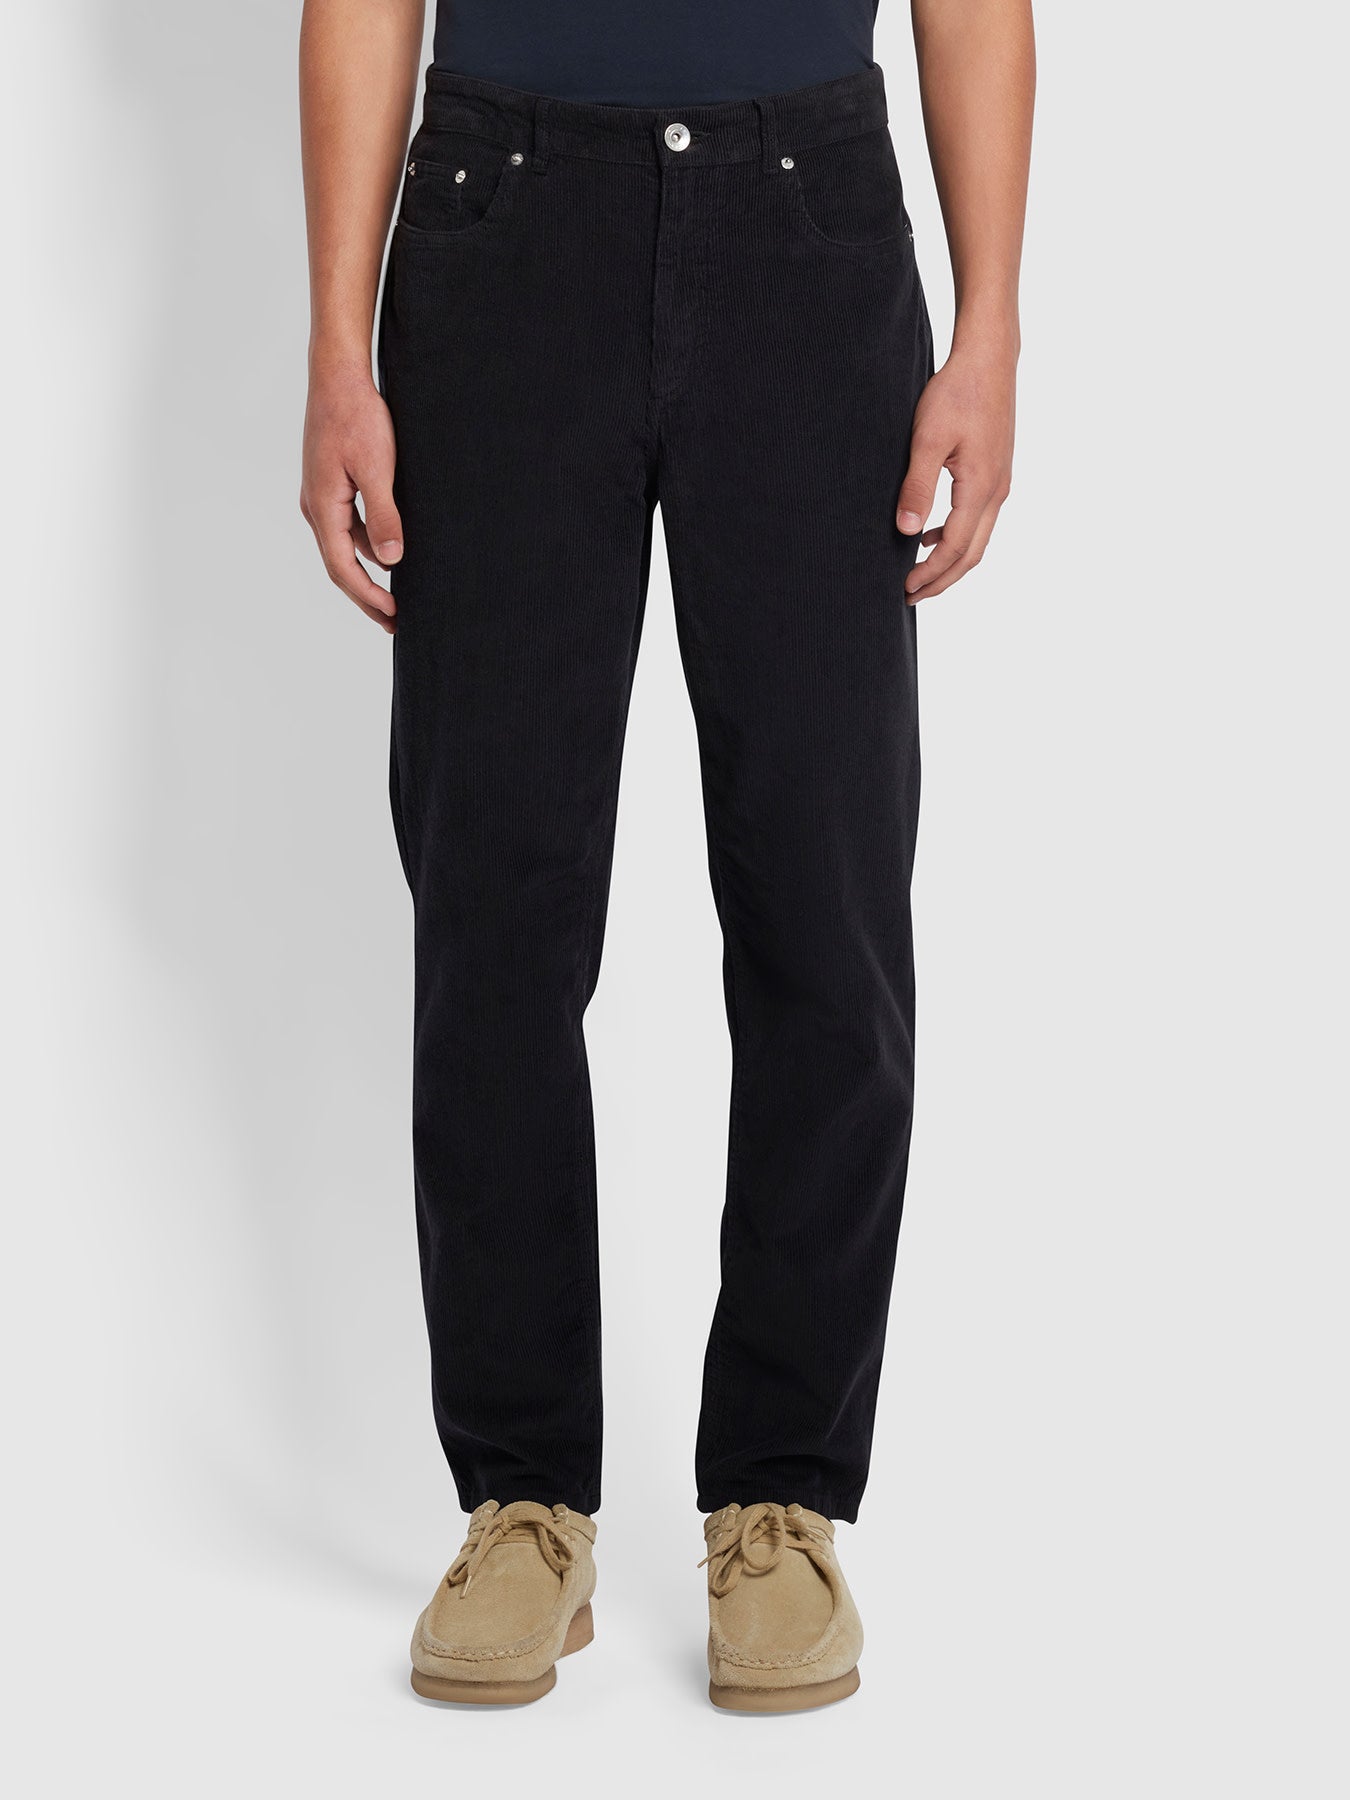 View Rushmore Regular Fit Tapered Corduroy Jeans In Black information